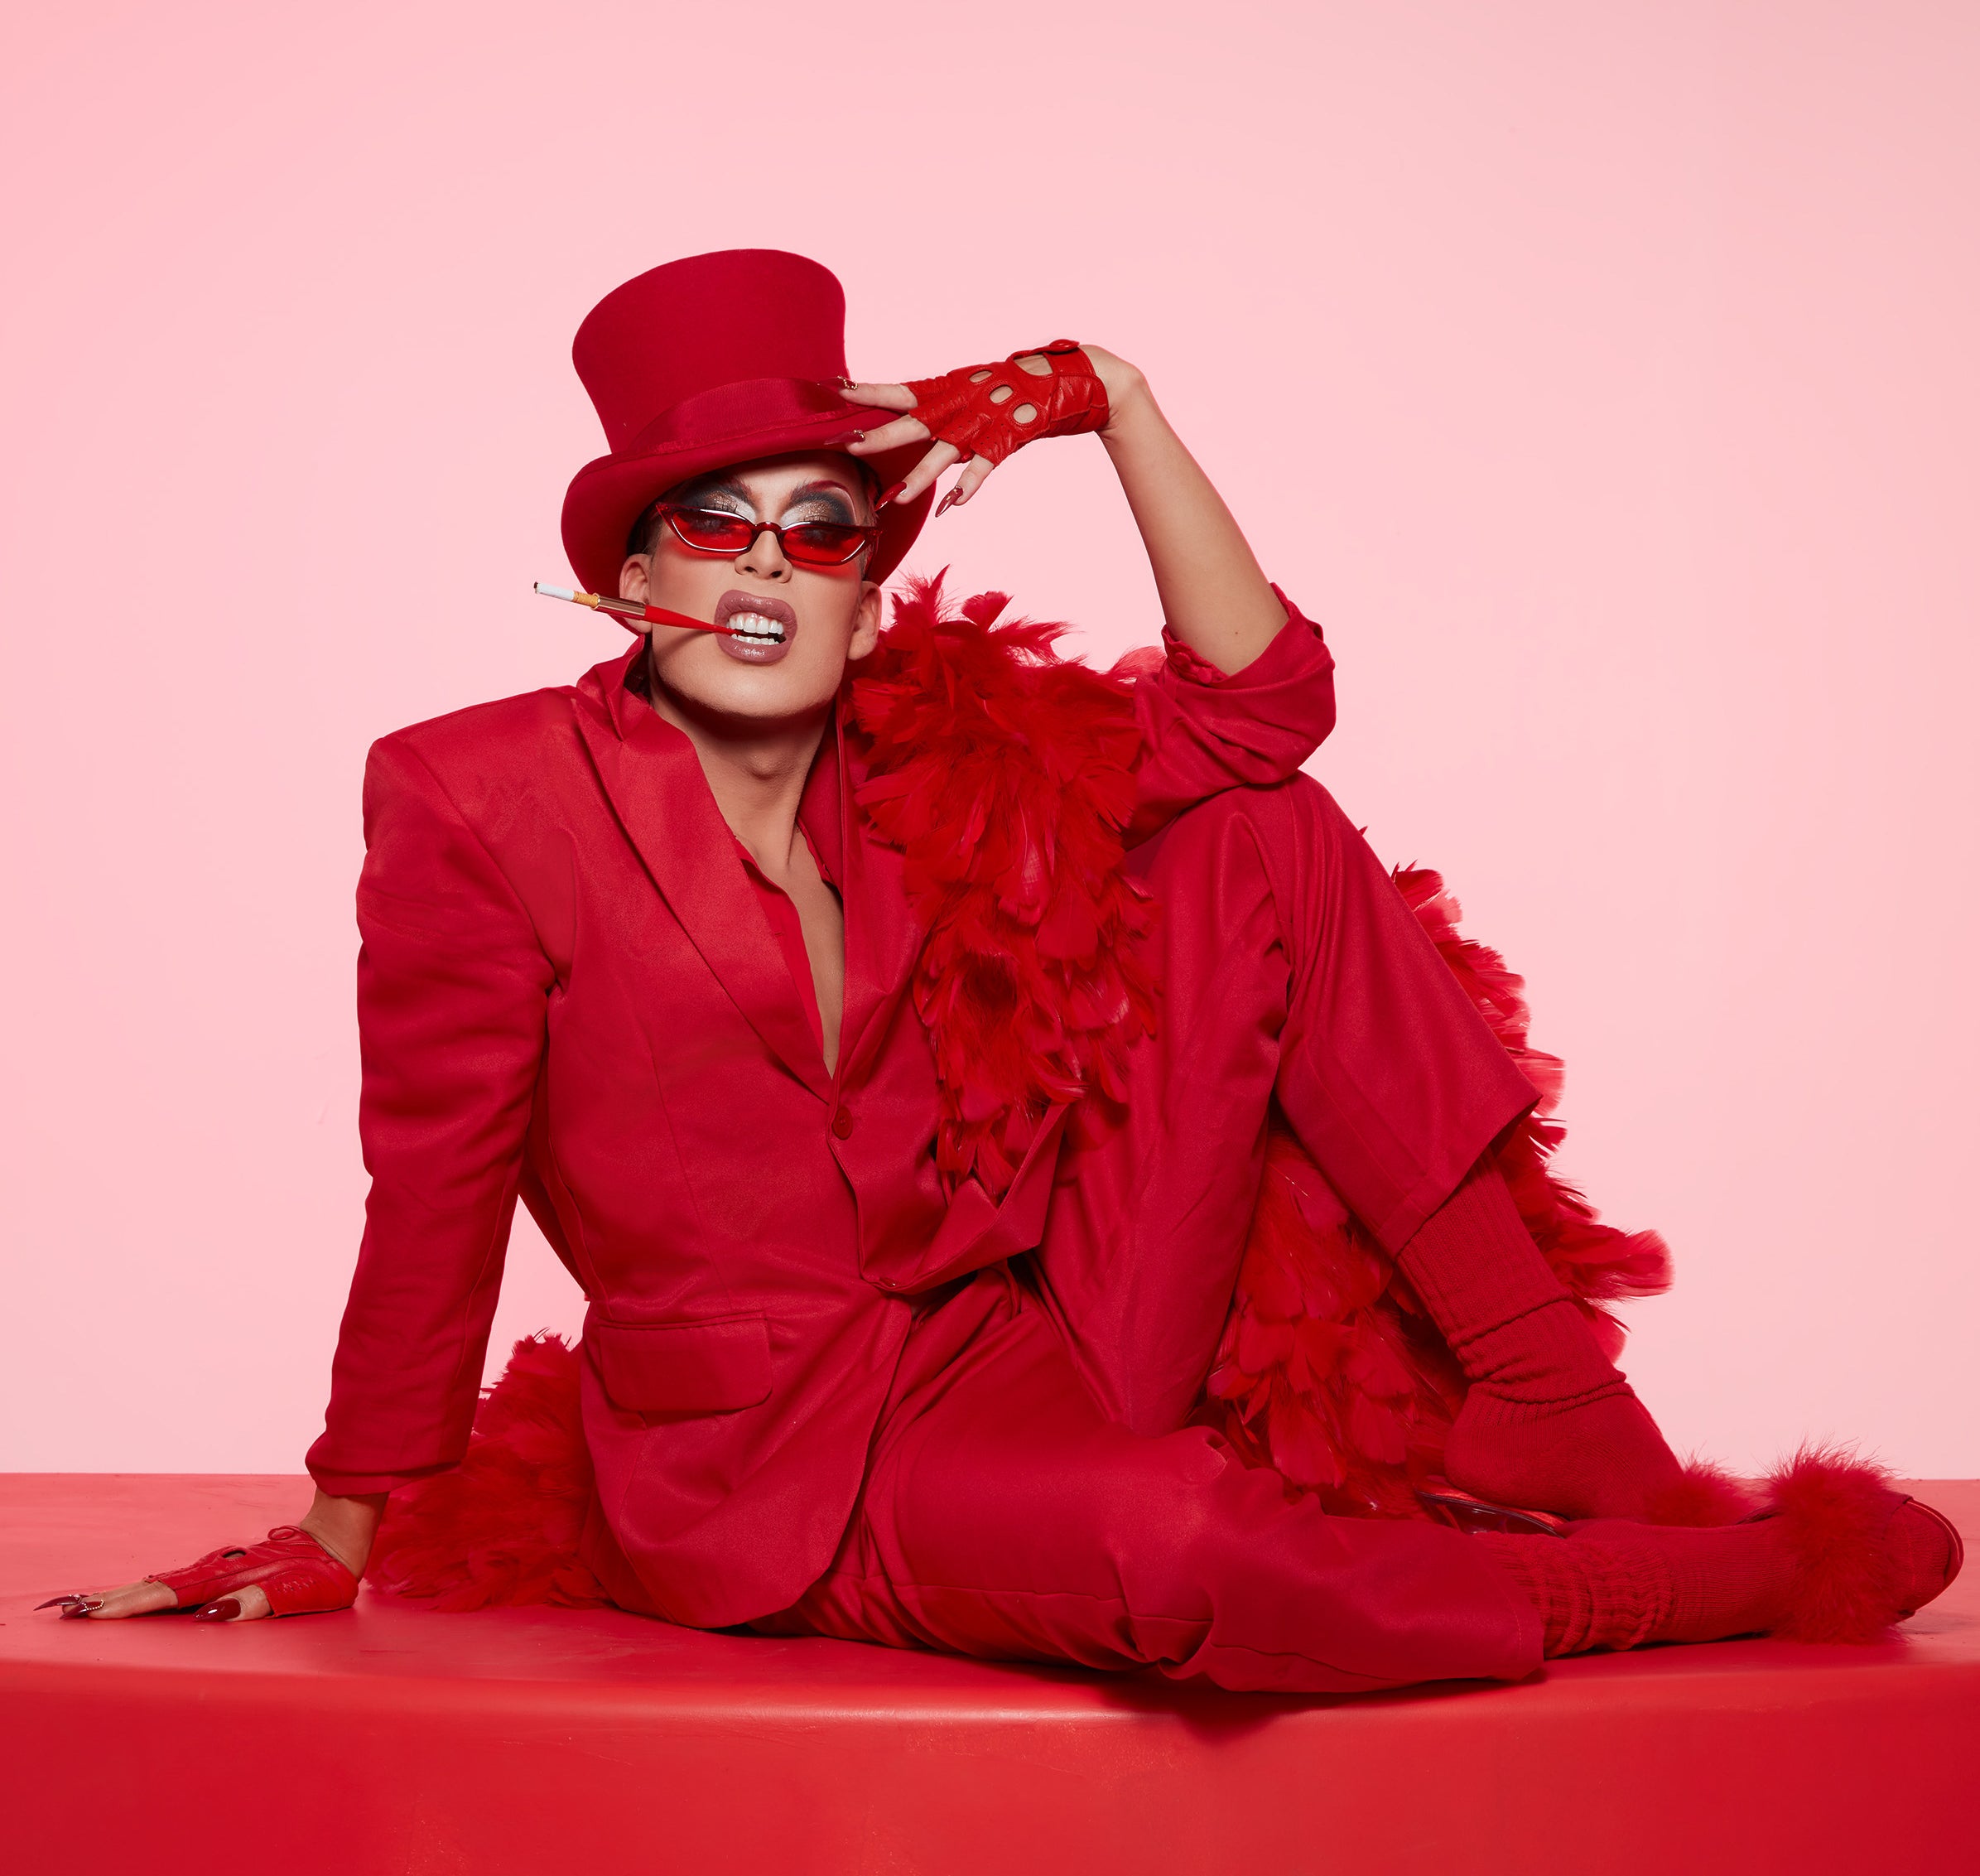 Alaska sitting on a red platform wearing a red suit and top hat